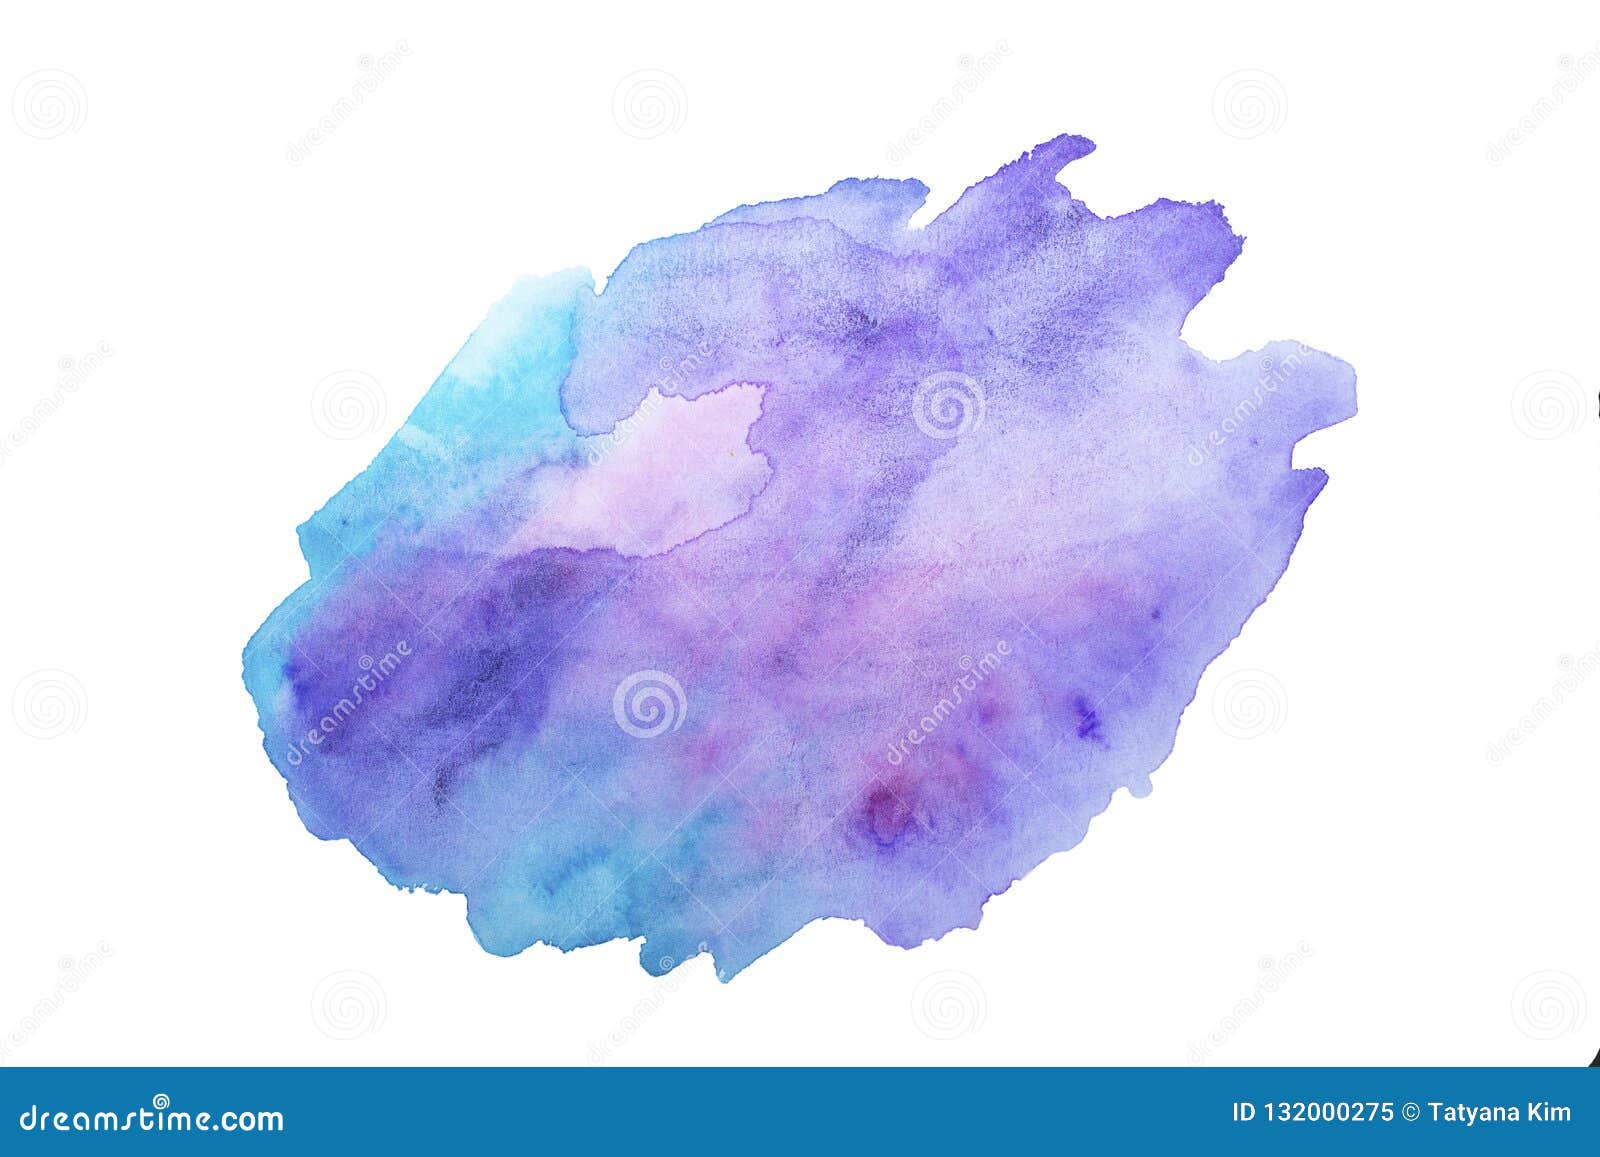 blue and violet watercolor abstract paint stroke on white background